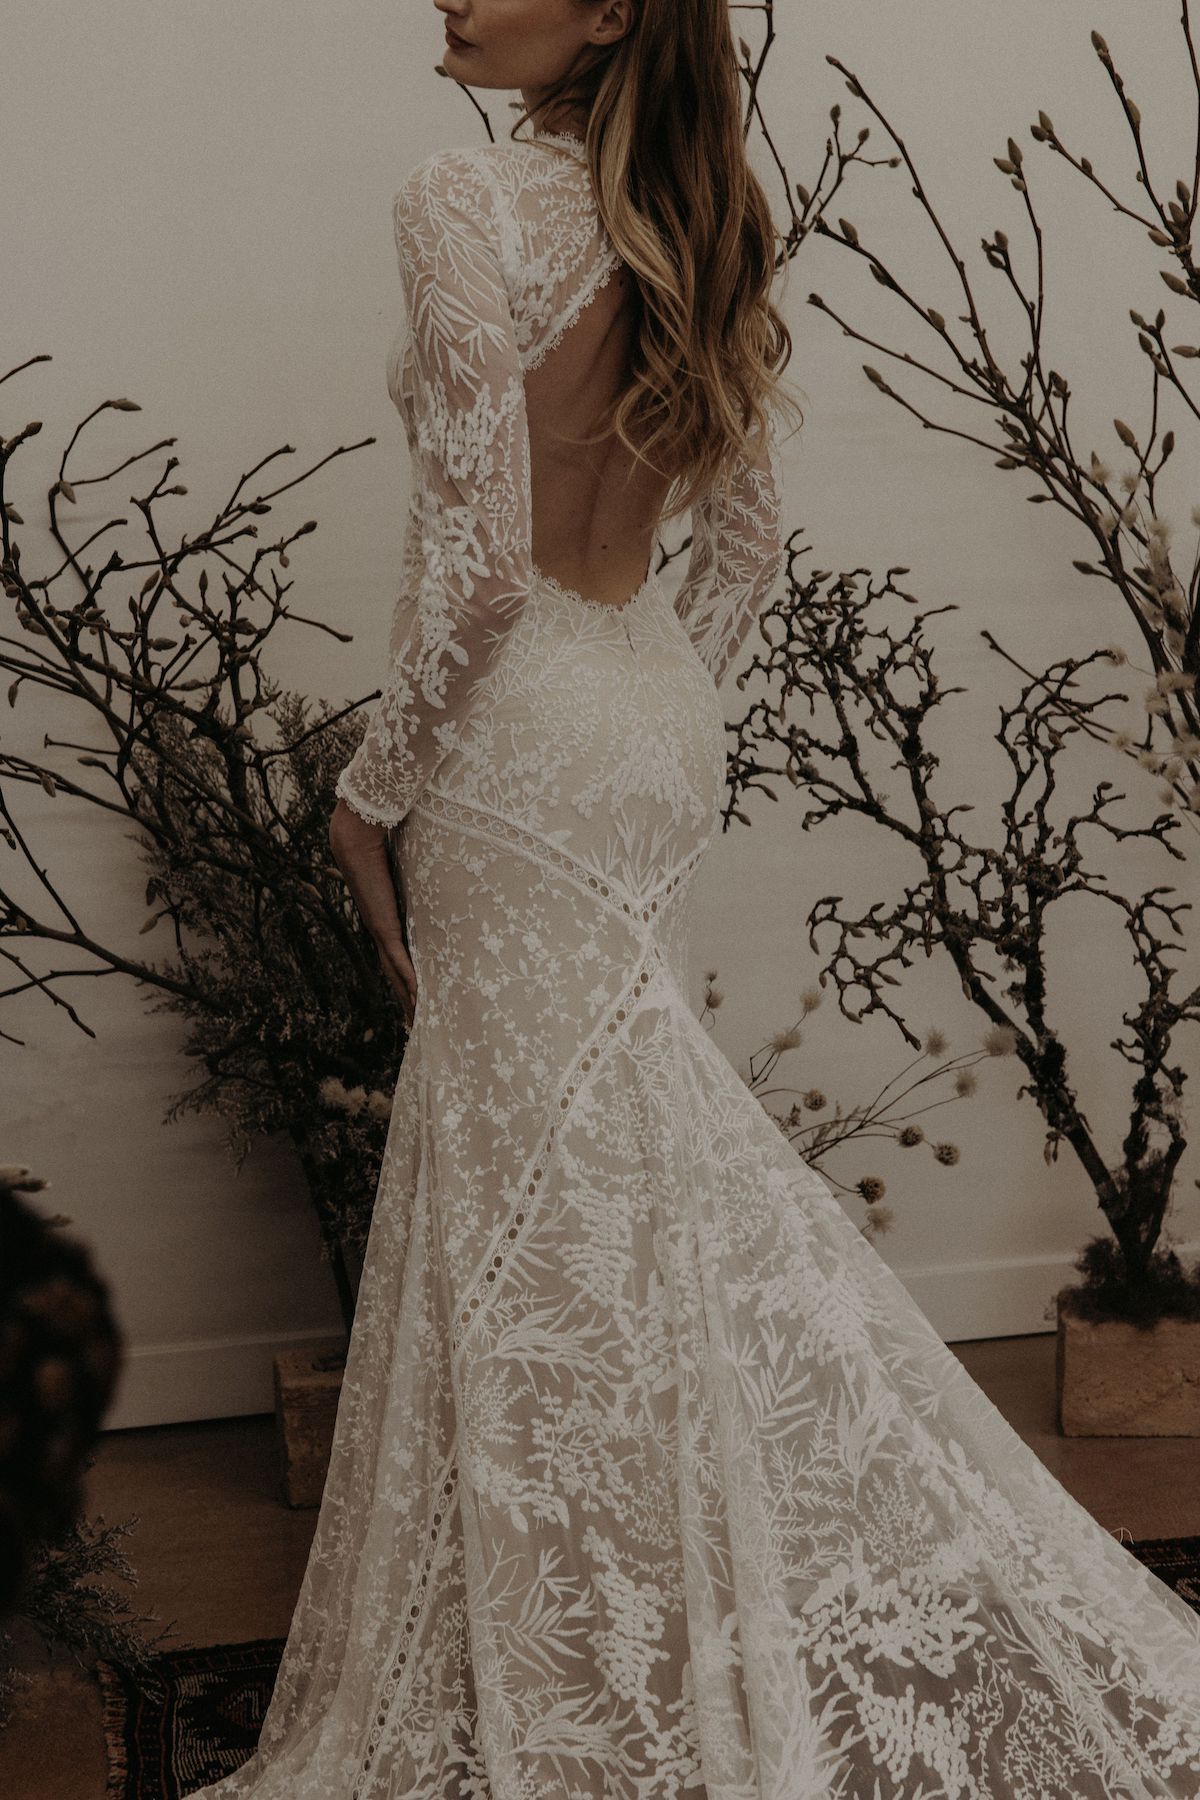 Sophie Backless Wedding Dress Dreamers And Lovers, 51% OFF